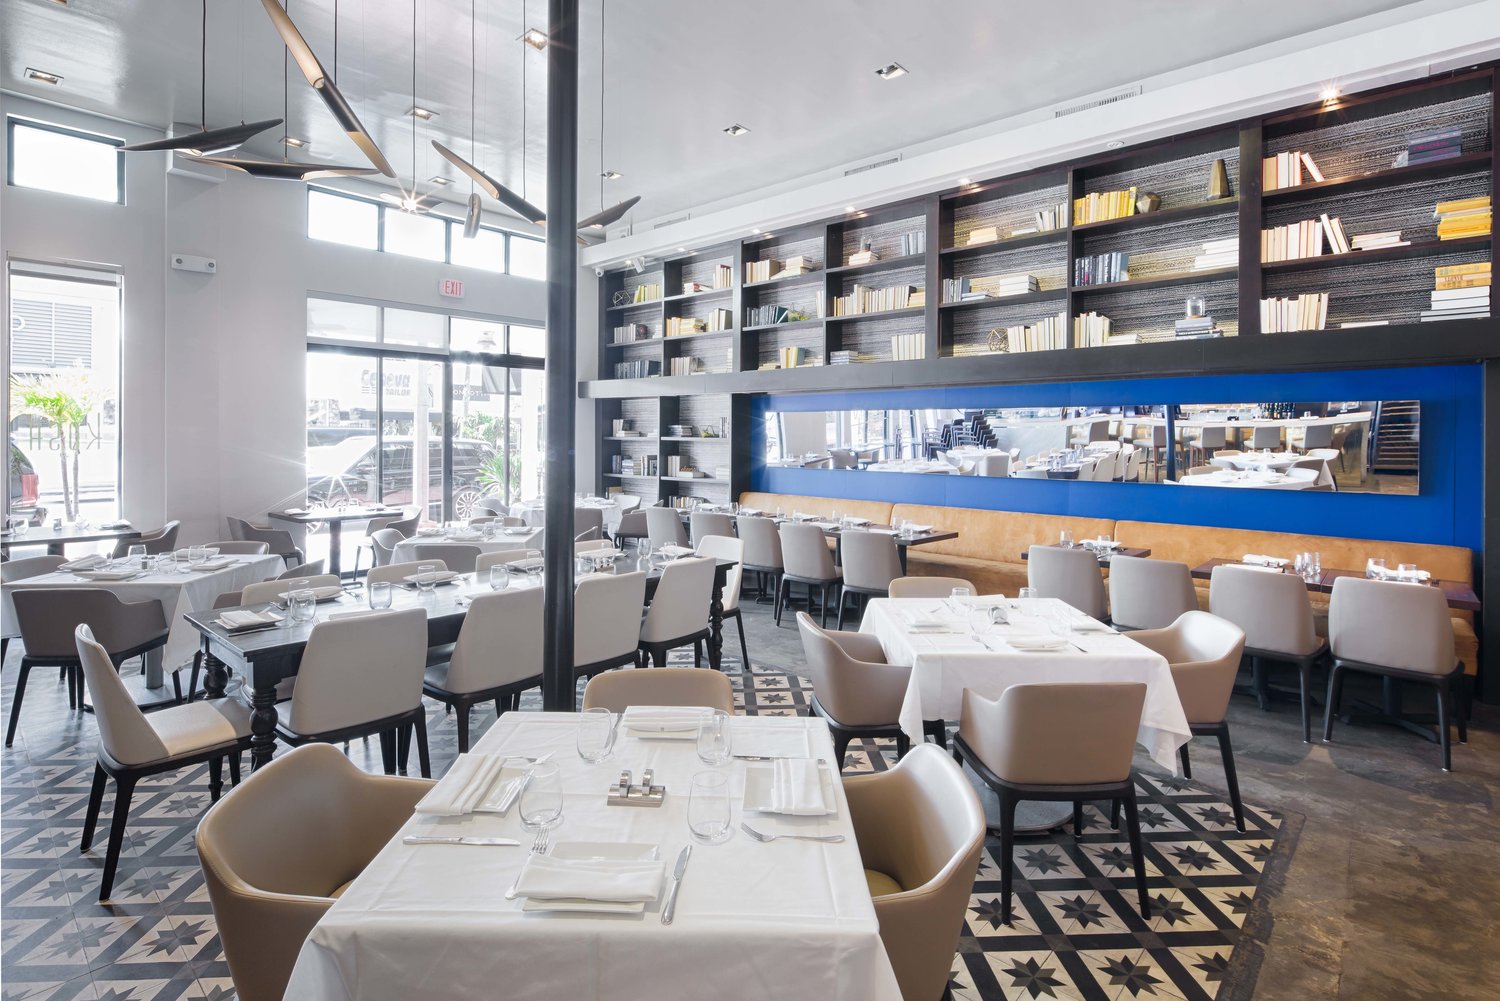 Kosh- When Great Food and Great Contemporary Lighting Come Together